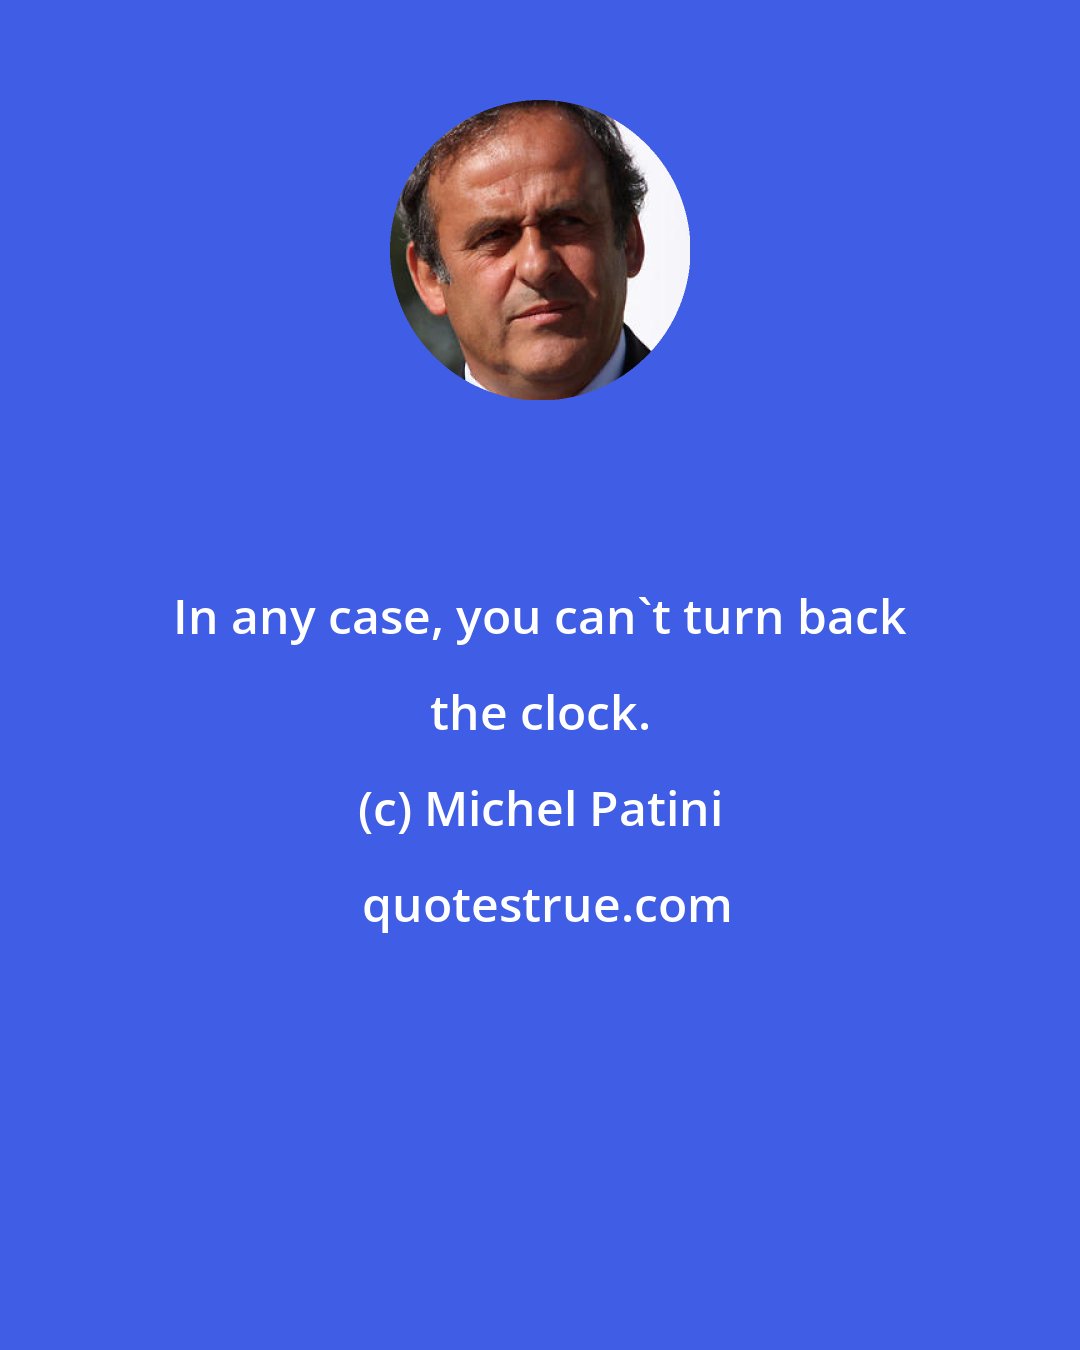 Michel Patini: In any case, you can't turn back the clock.